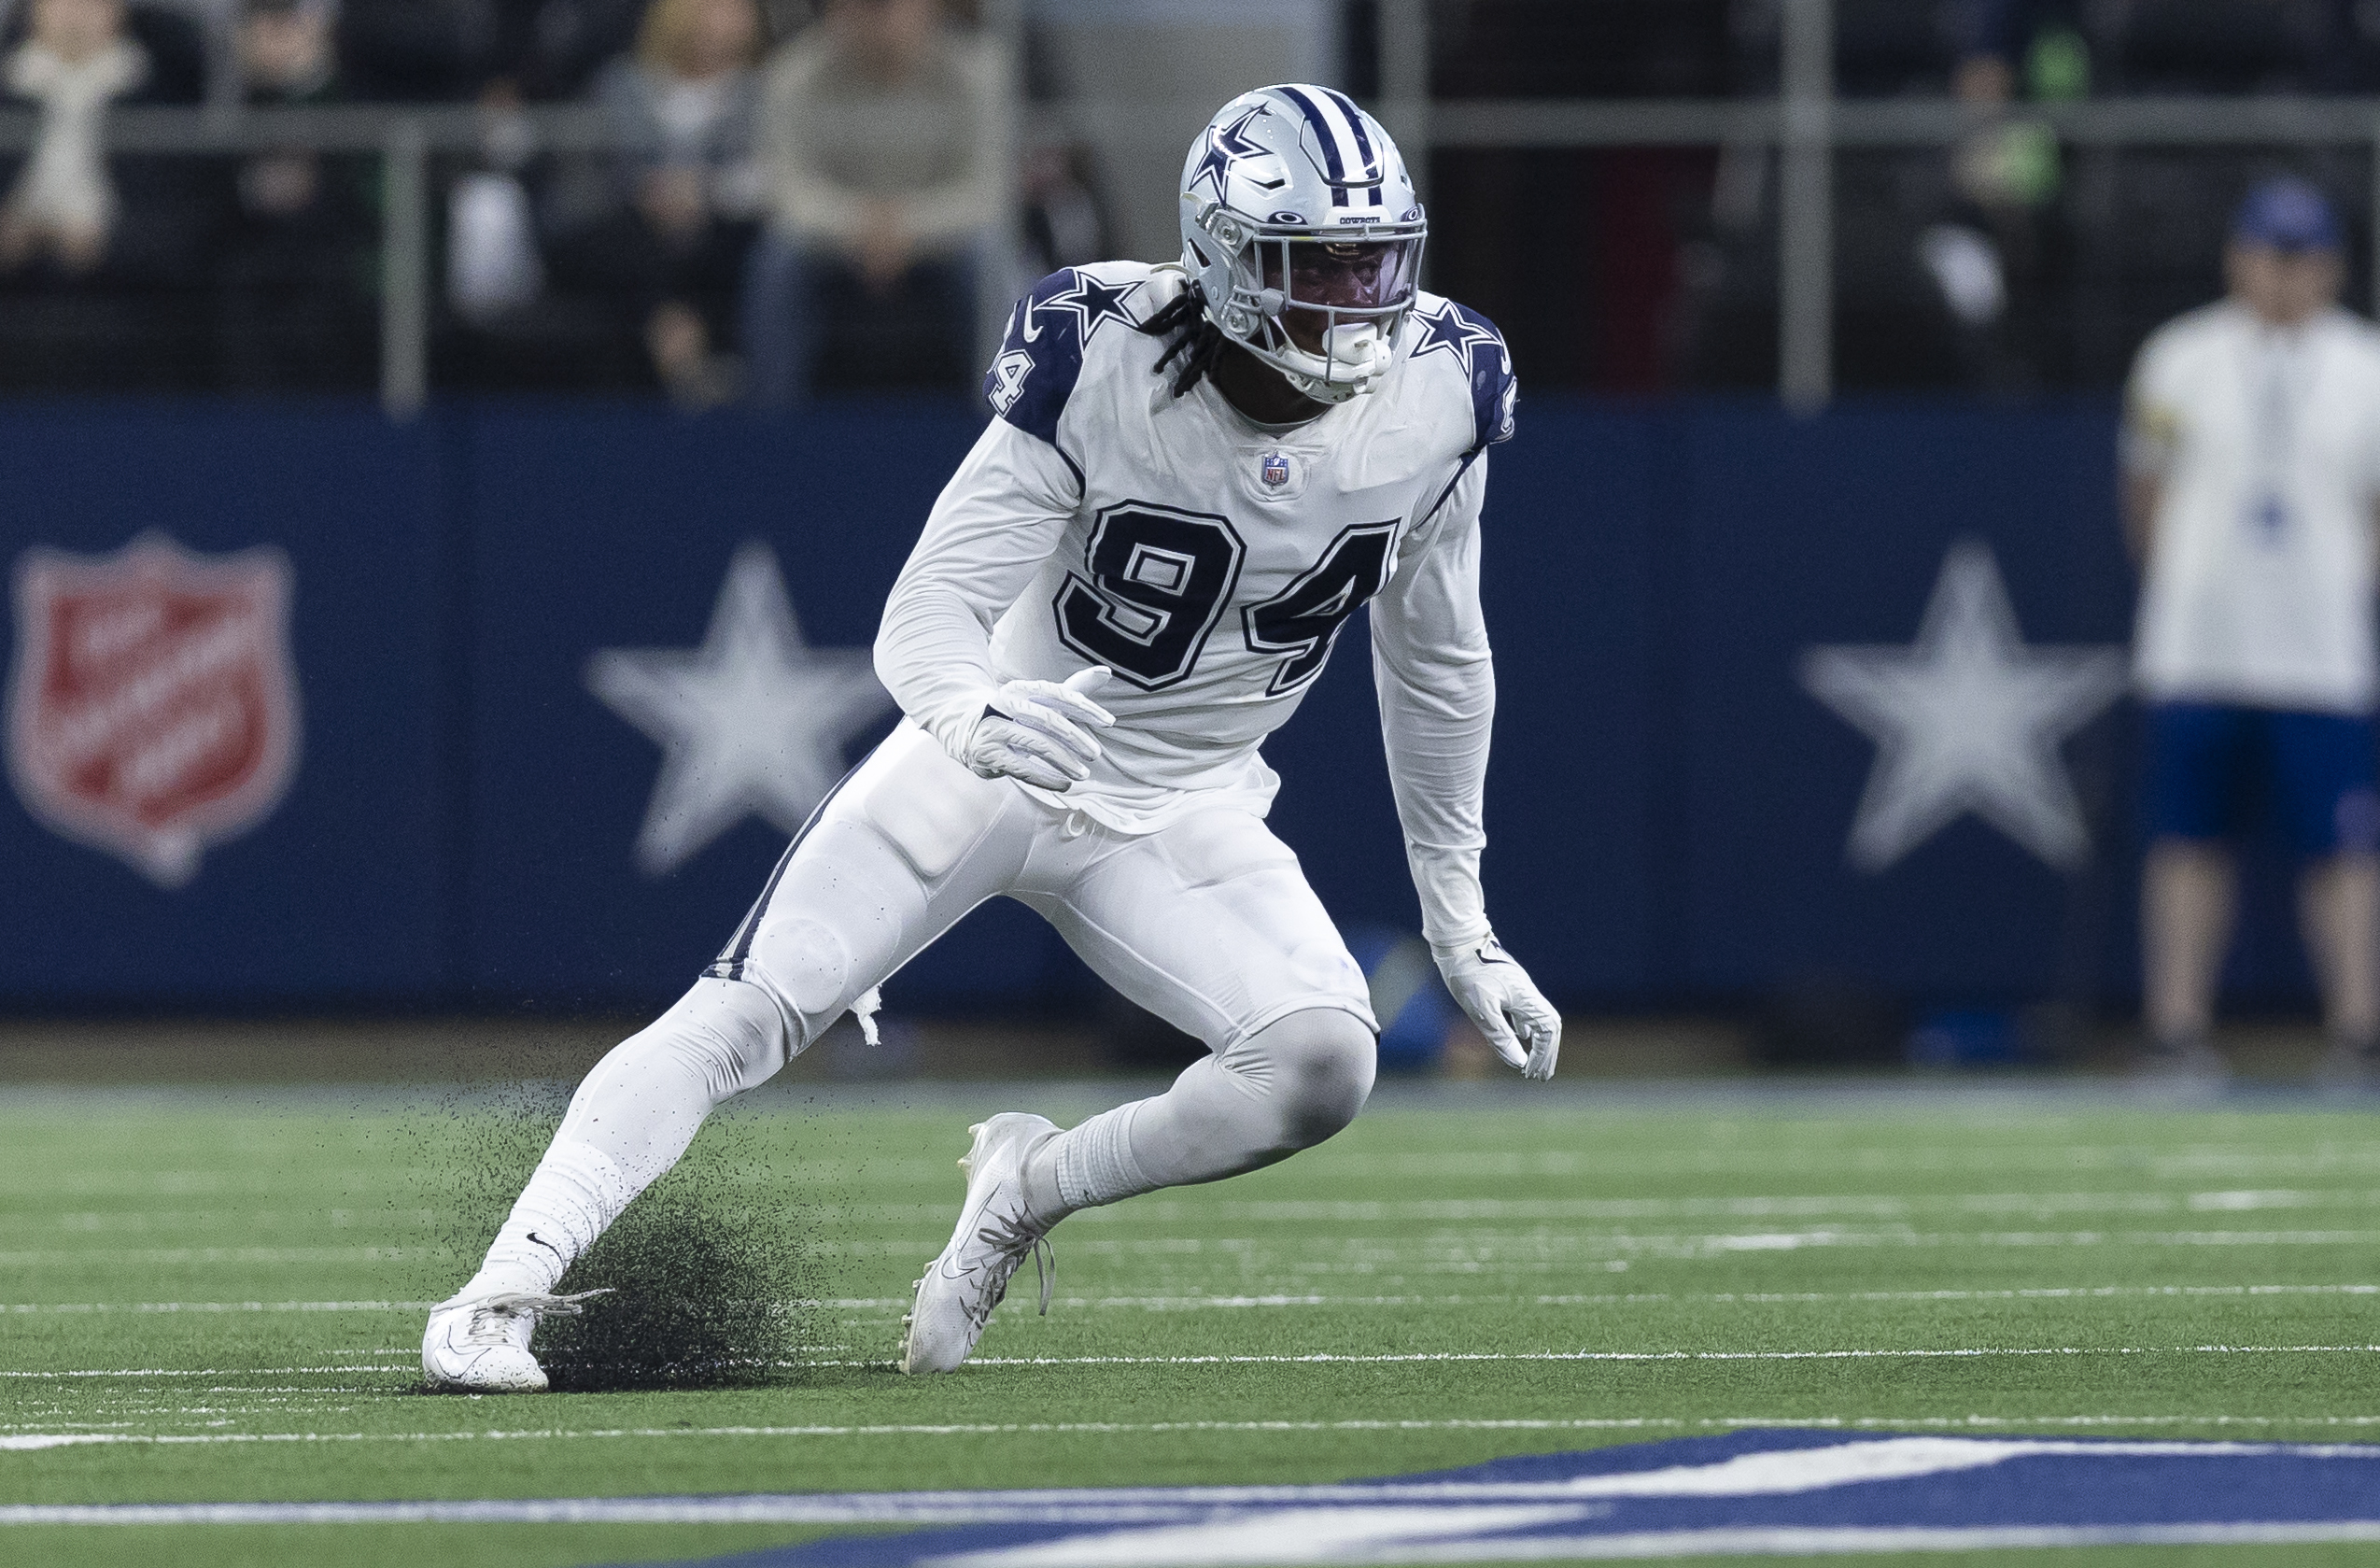 Broncos' Randy Gregory Says Cowboys Owners Acted in 'Bad Faith' in Deleted Tweet